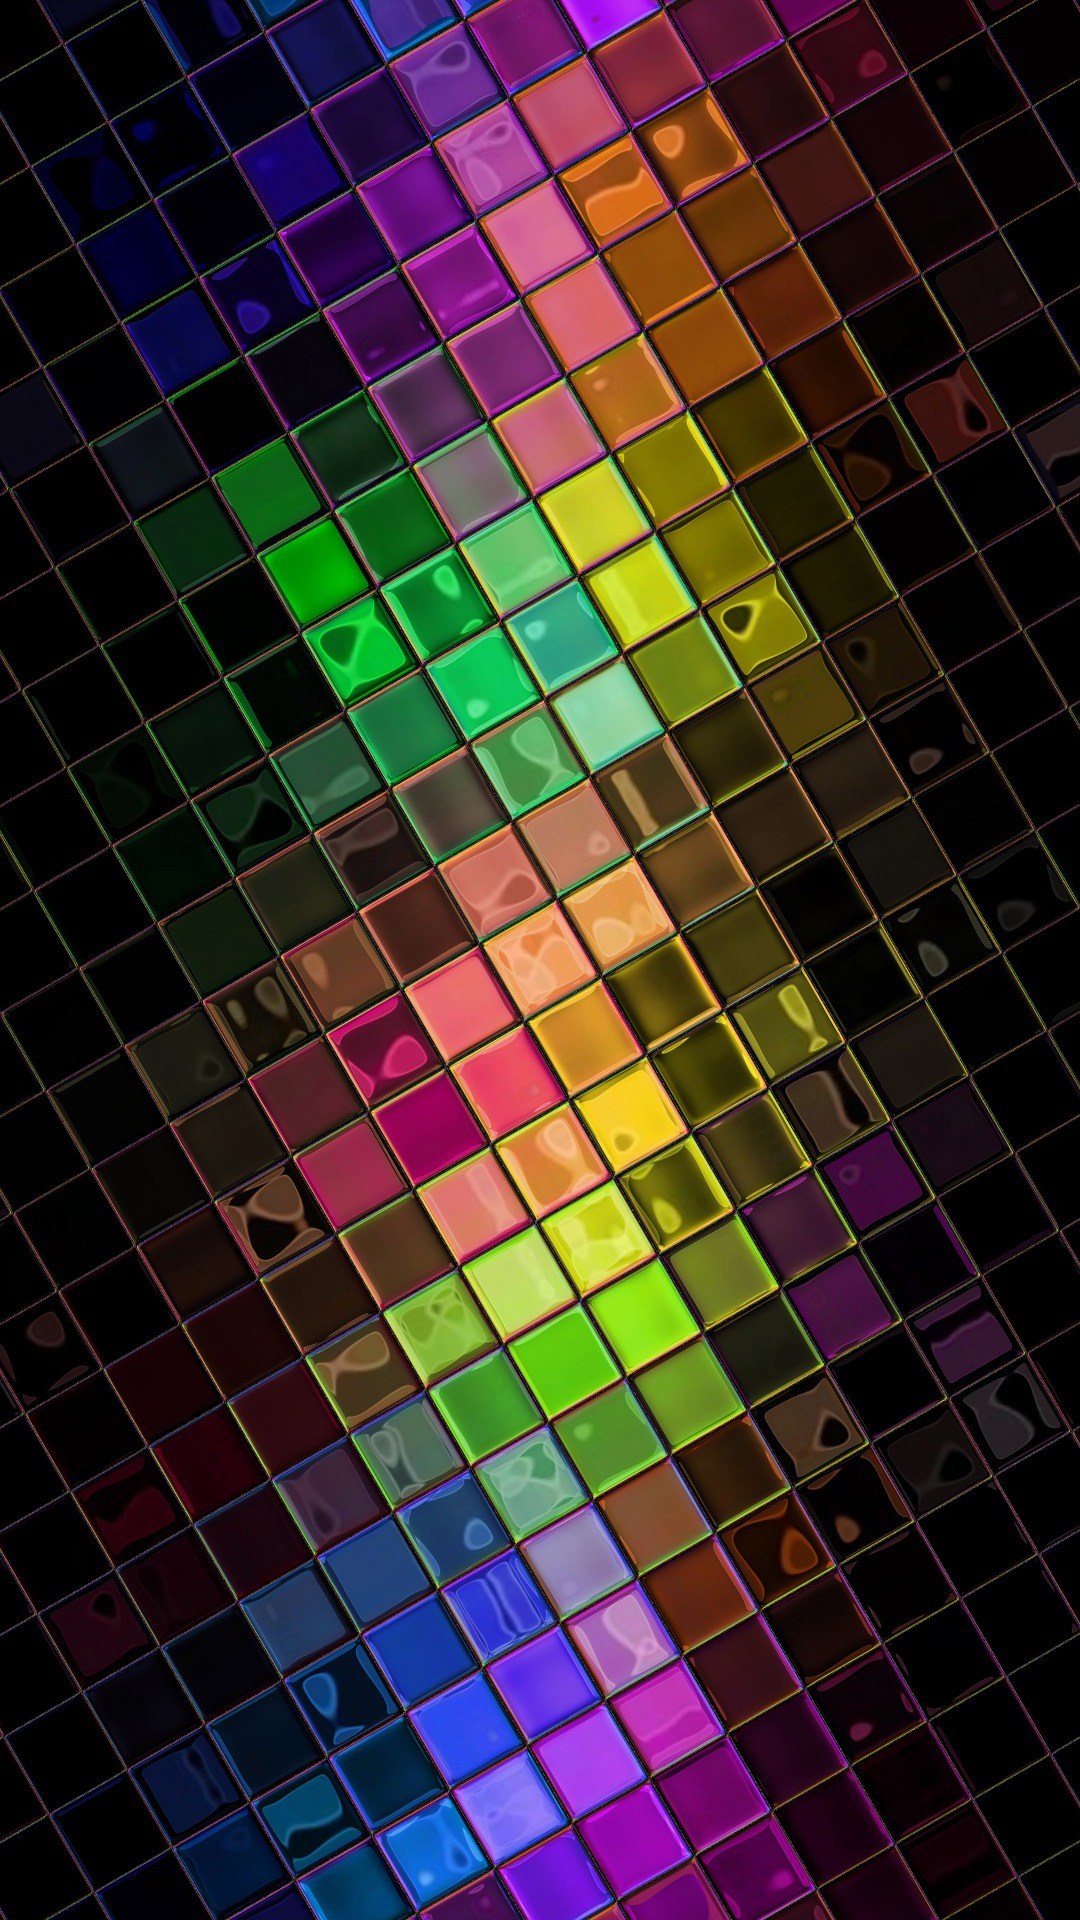 squares   Full HD wallpapers for iPhone 6 Plus 1080x1920